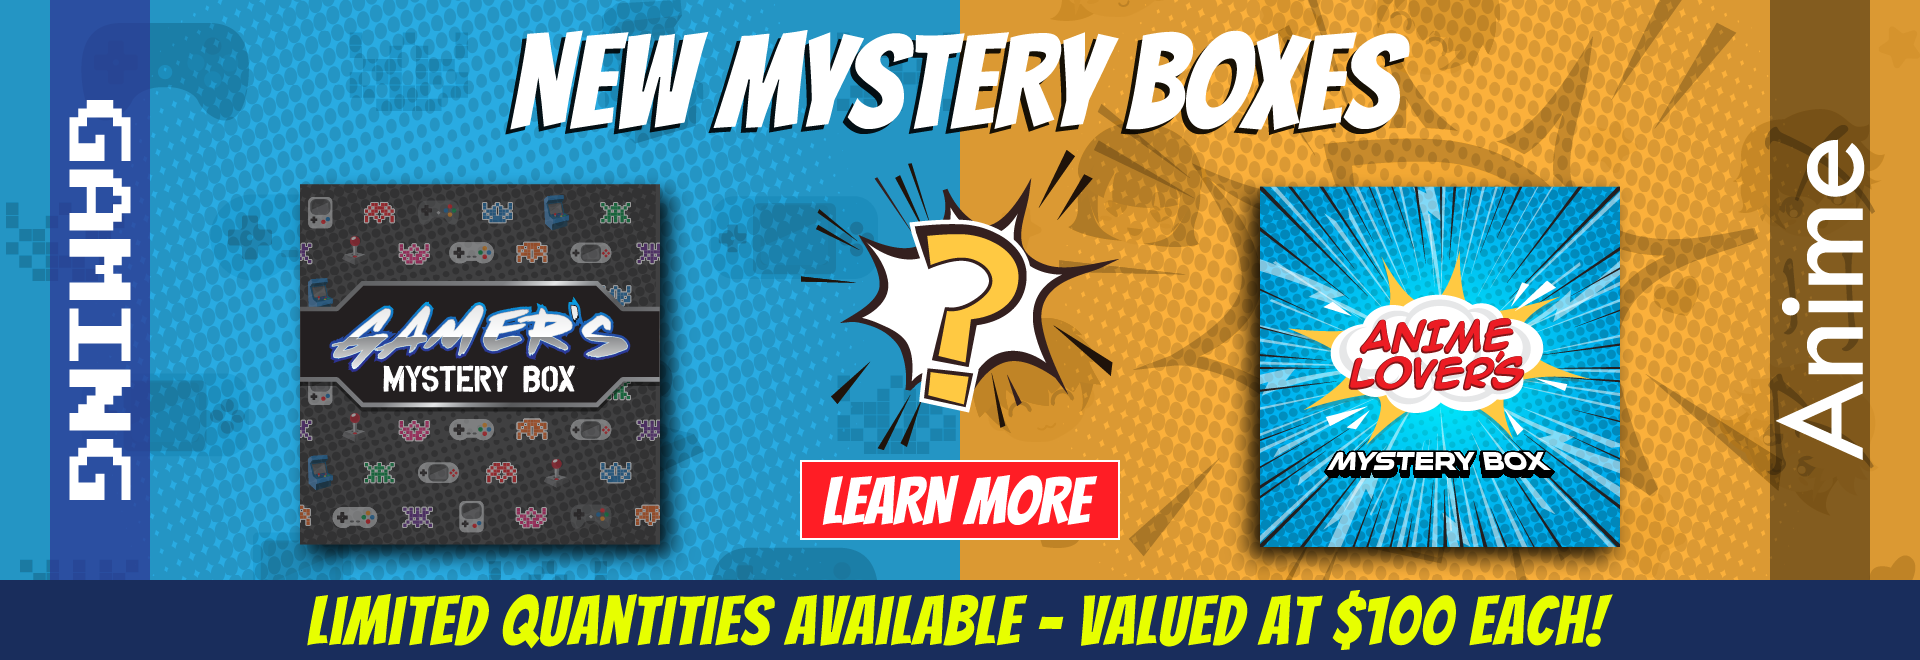 New Mystery Boxes - Limited Quantities!